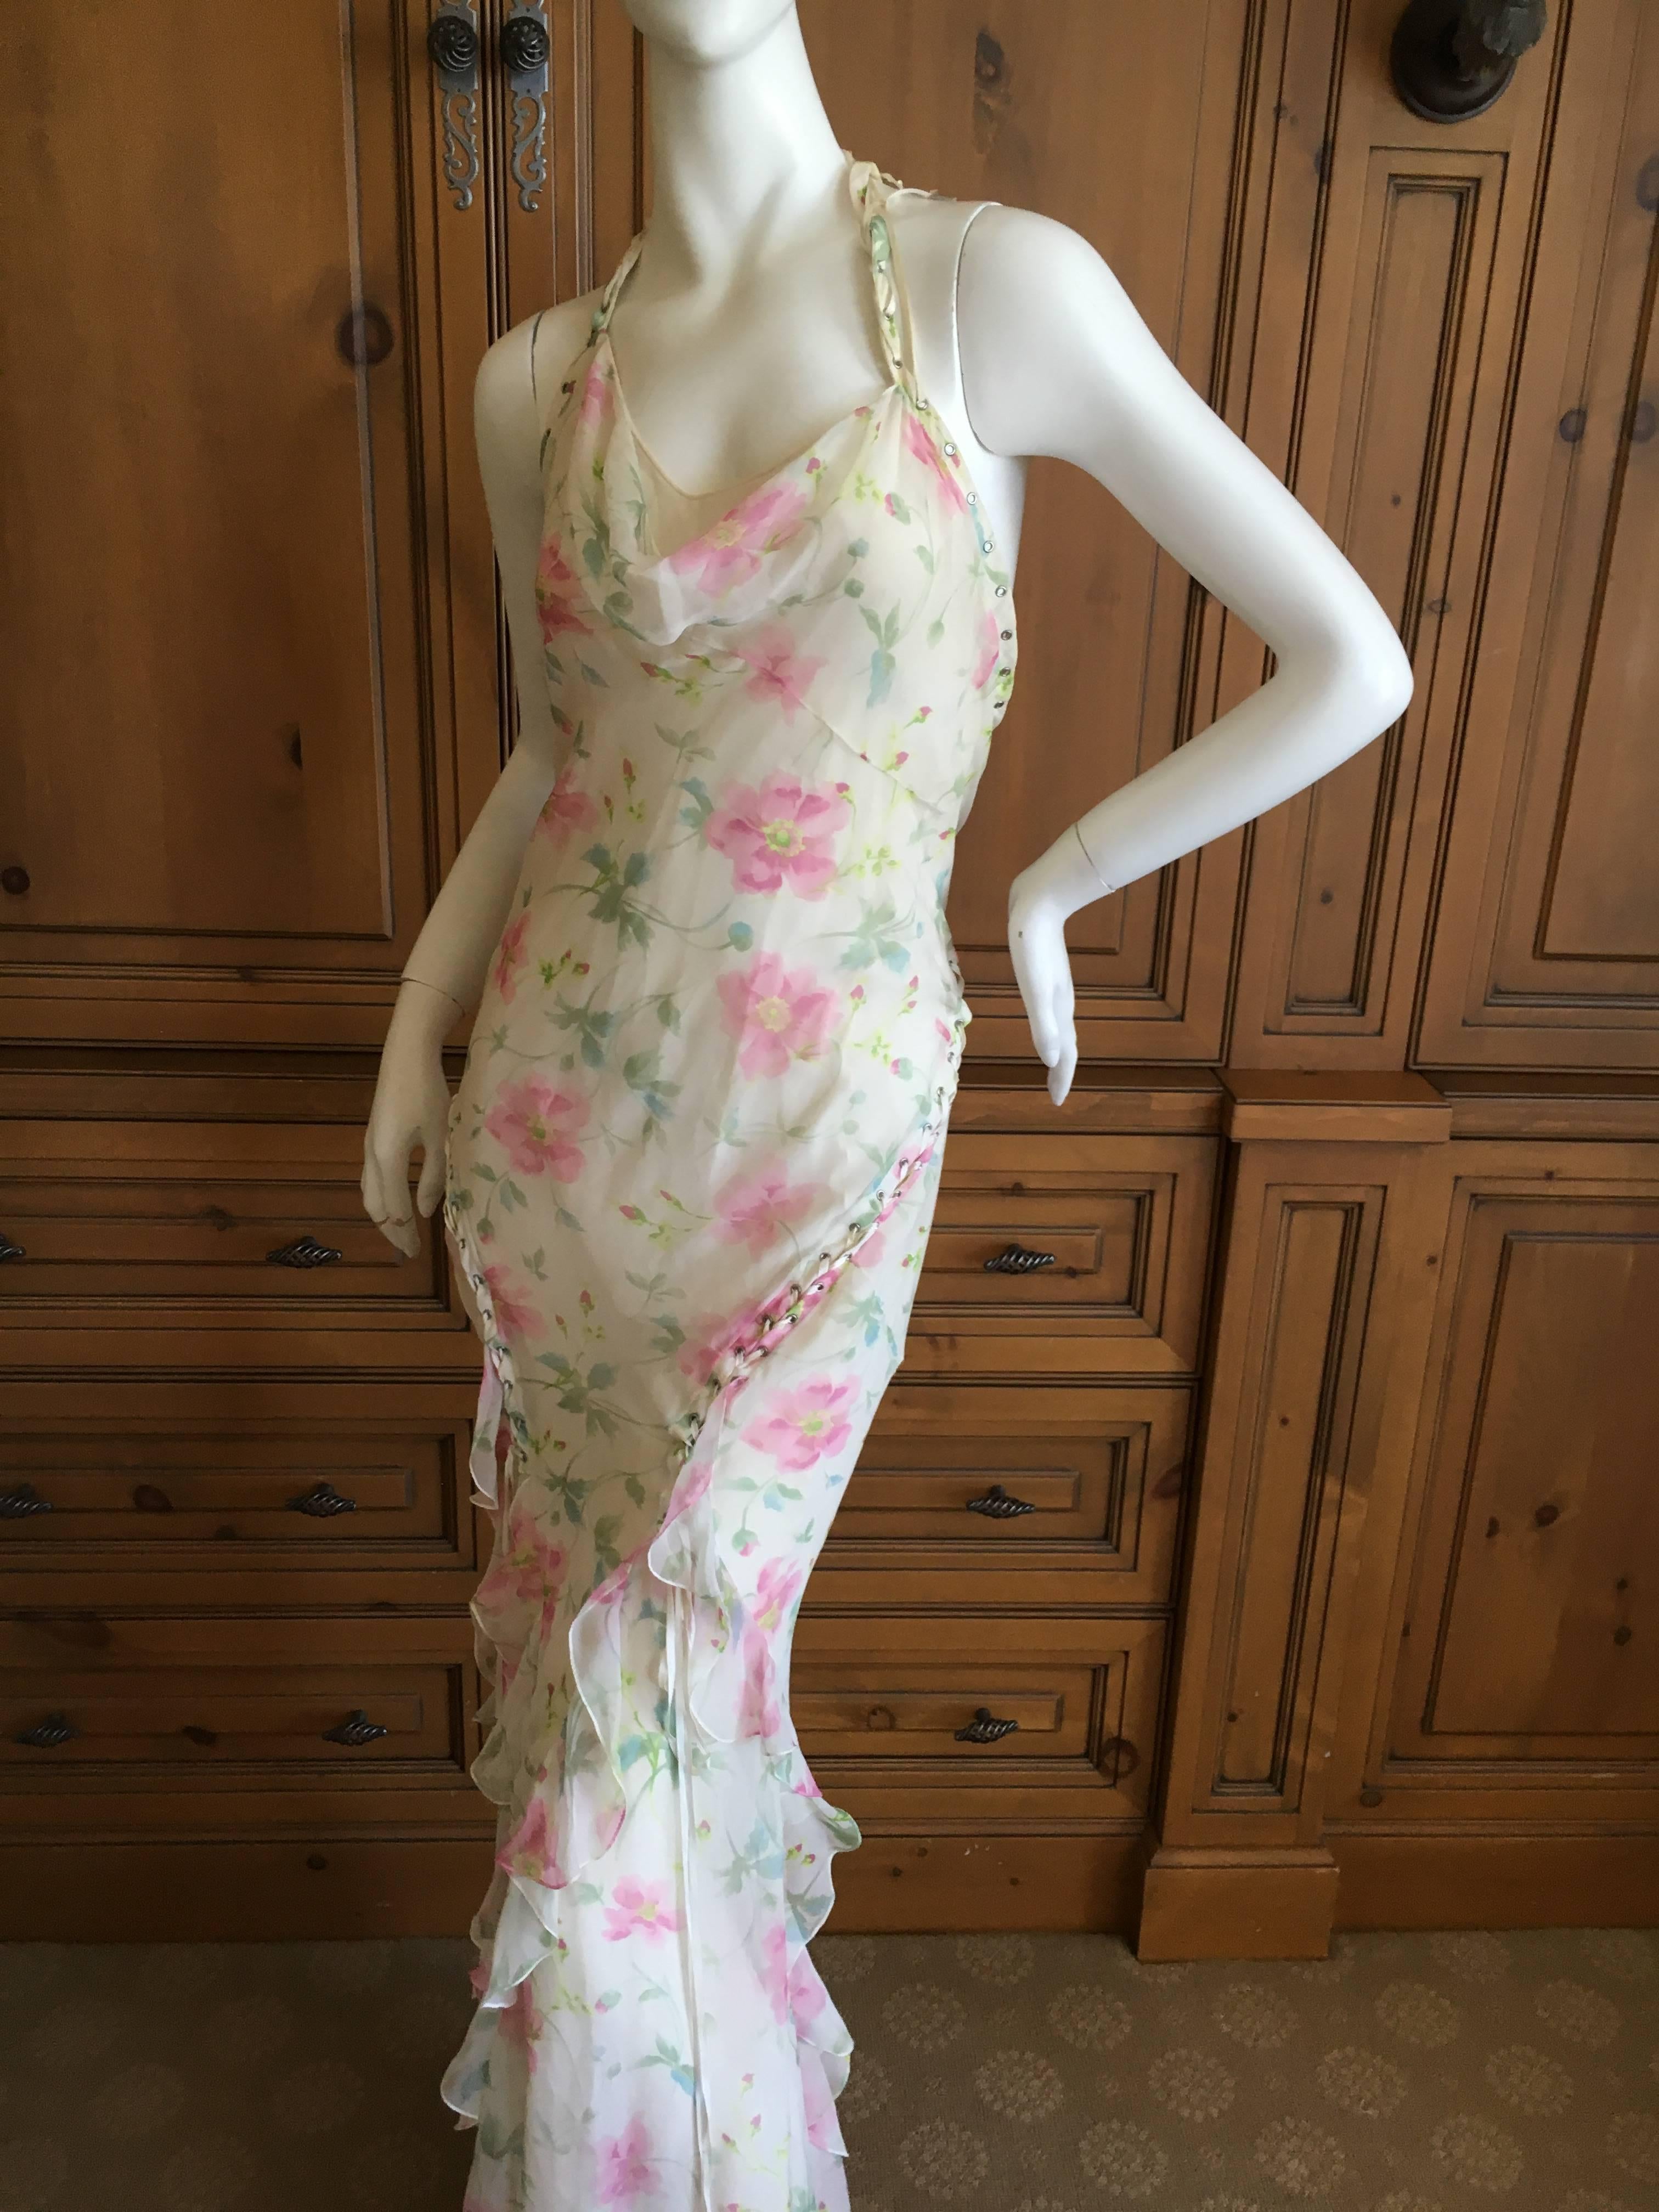 Dior by Galliano Sweet Ruffled Silk Floral Dress with Corset Lace Details 1